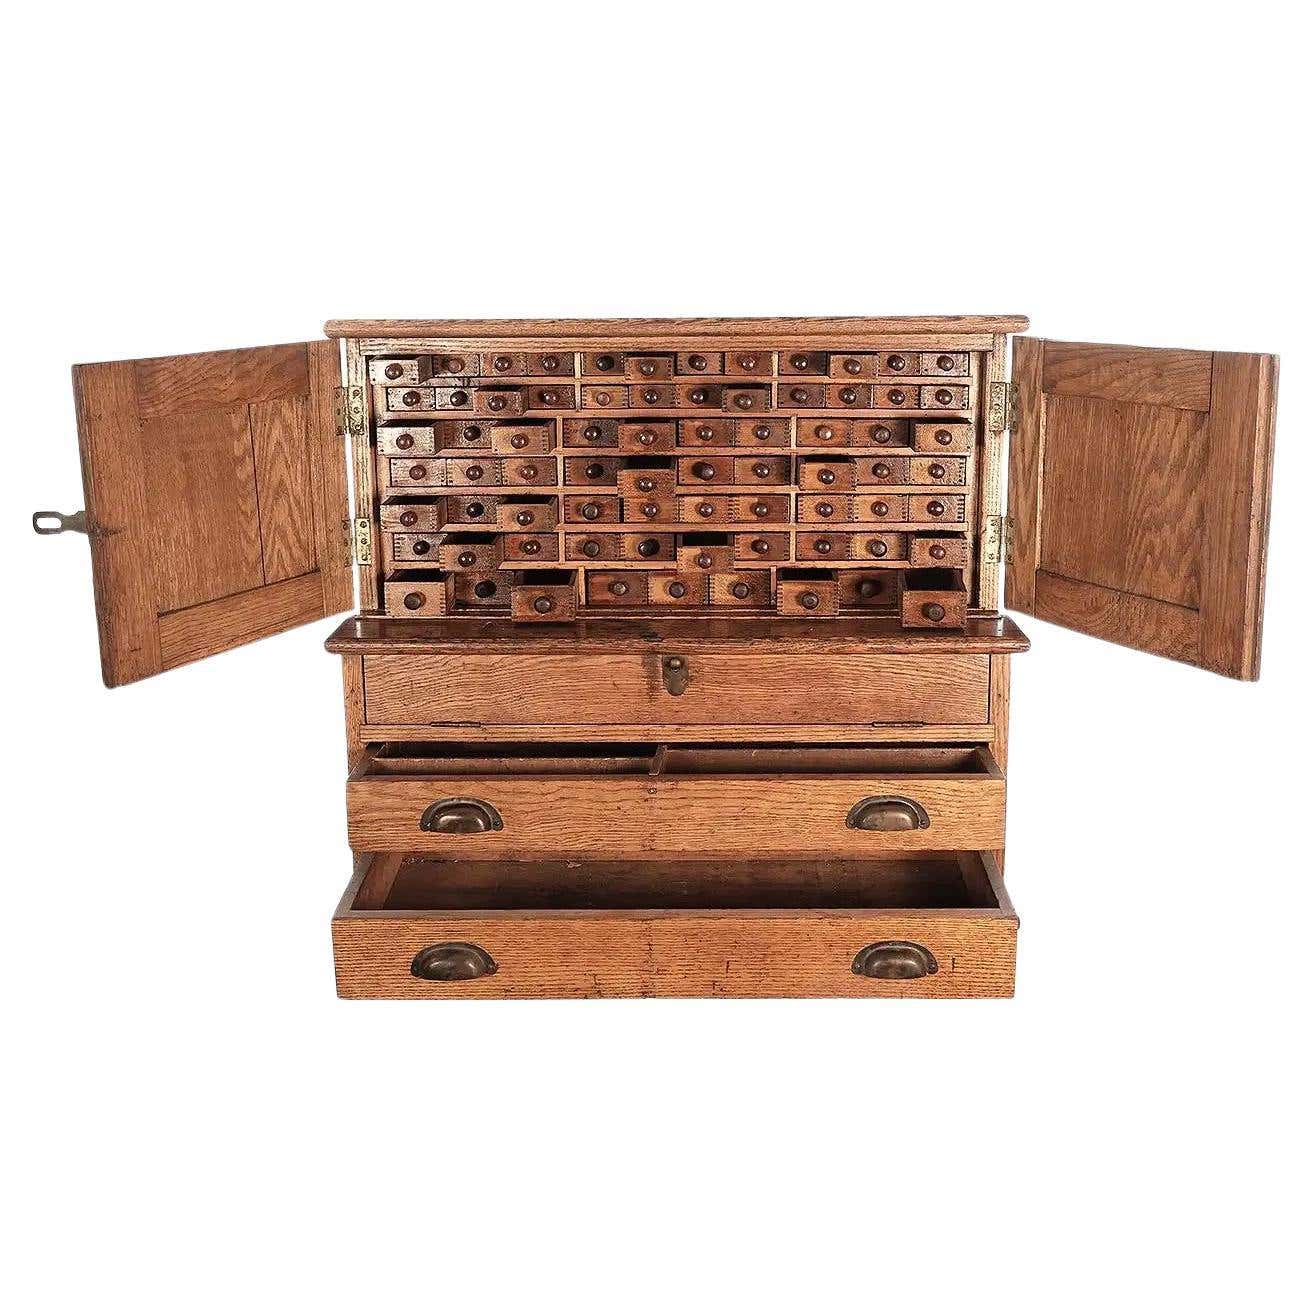 Machinist Tool Chest - 2 For Sale on 1stDibs